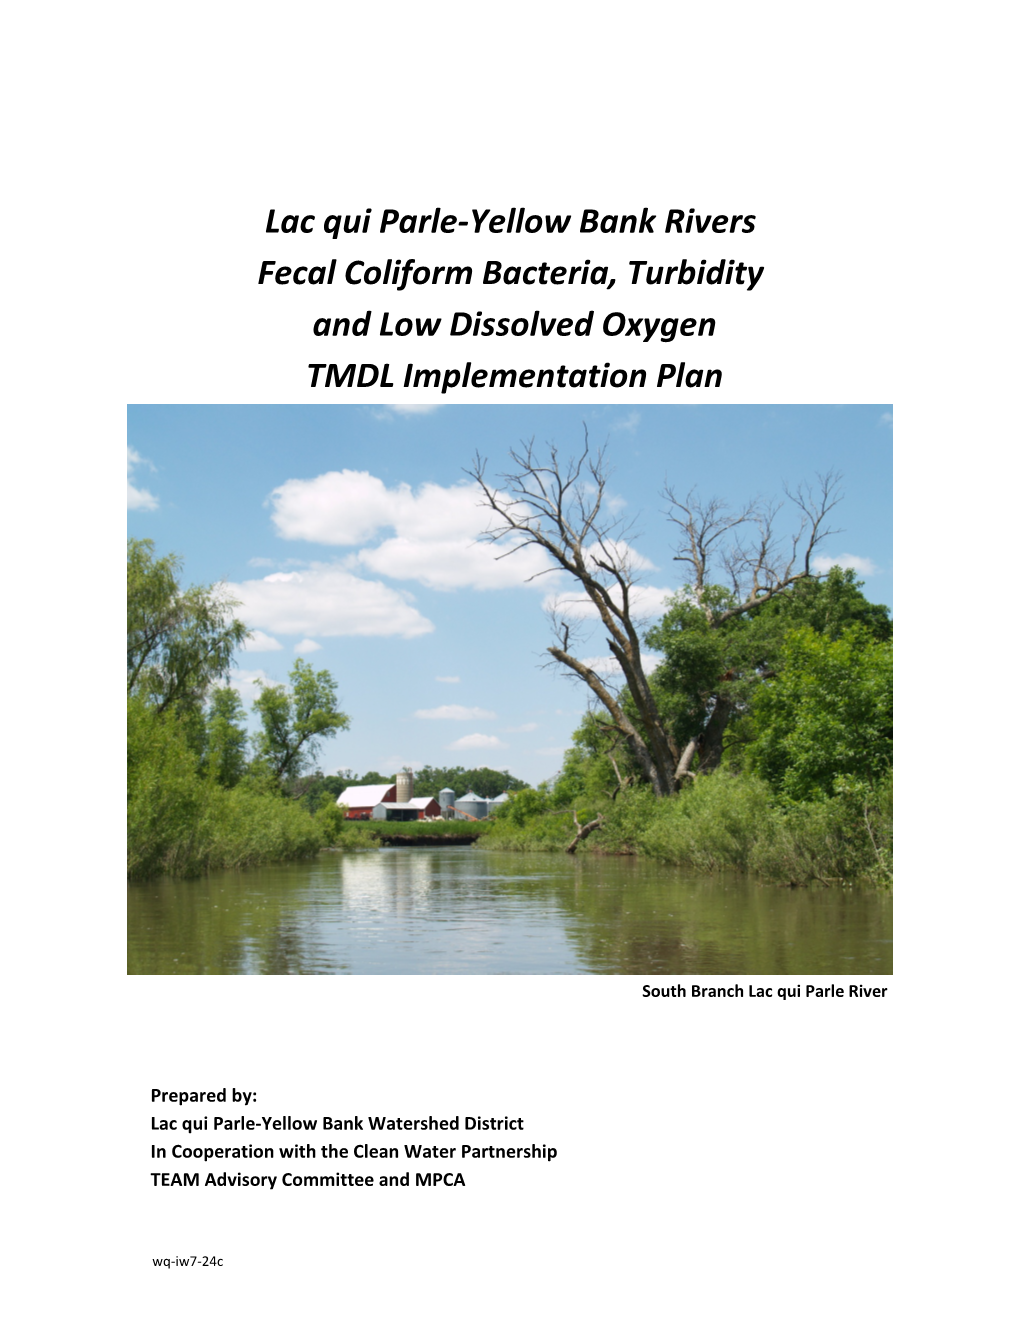 Lac Qui Parle-Yellow Bank Rivers Fecal Coliform Bacteria, Turbidity and Low Dissolved Oxygen TMDL Implementation Plan